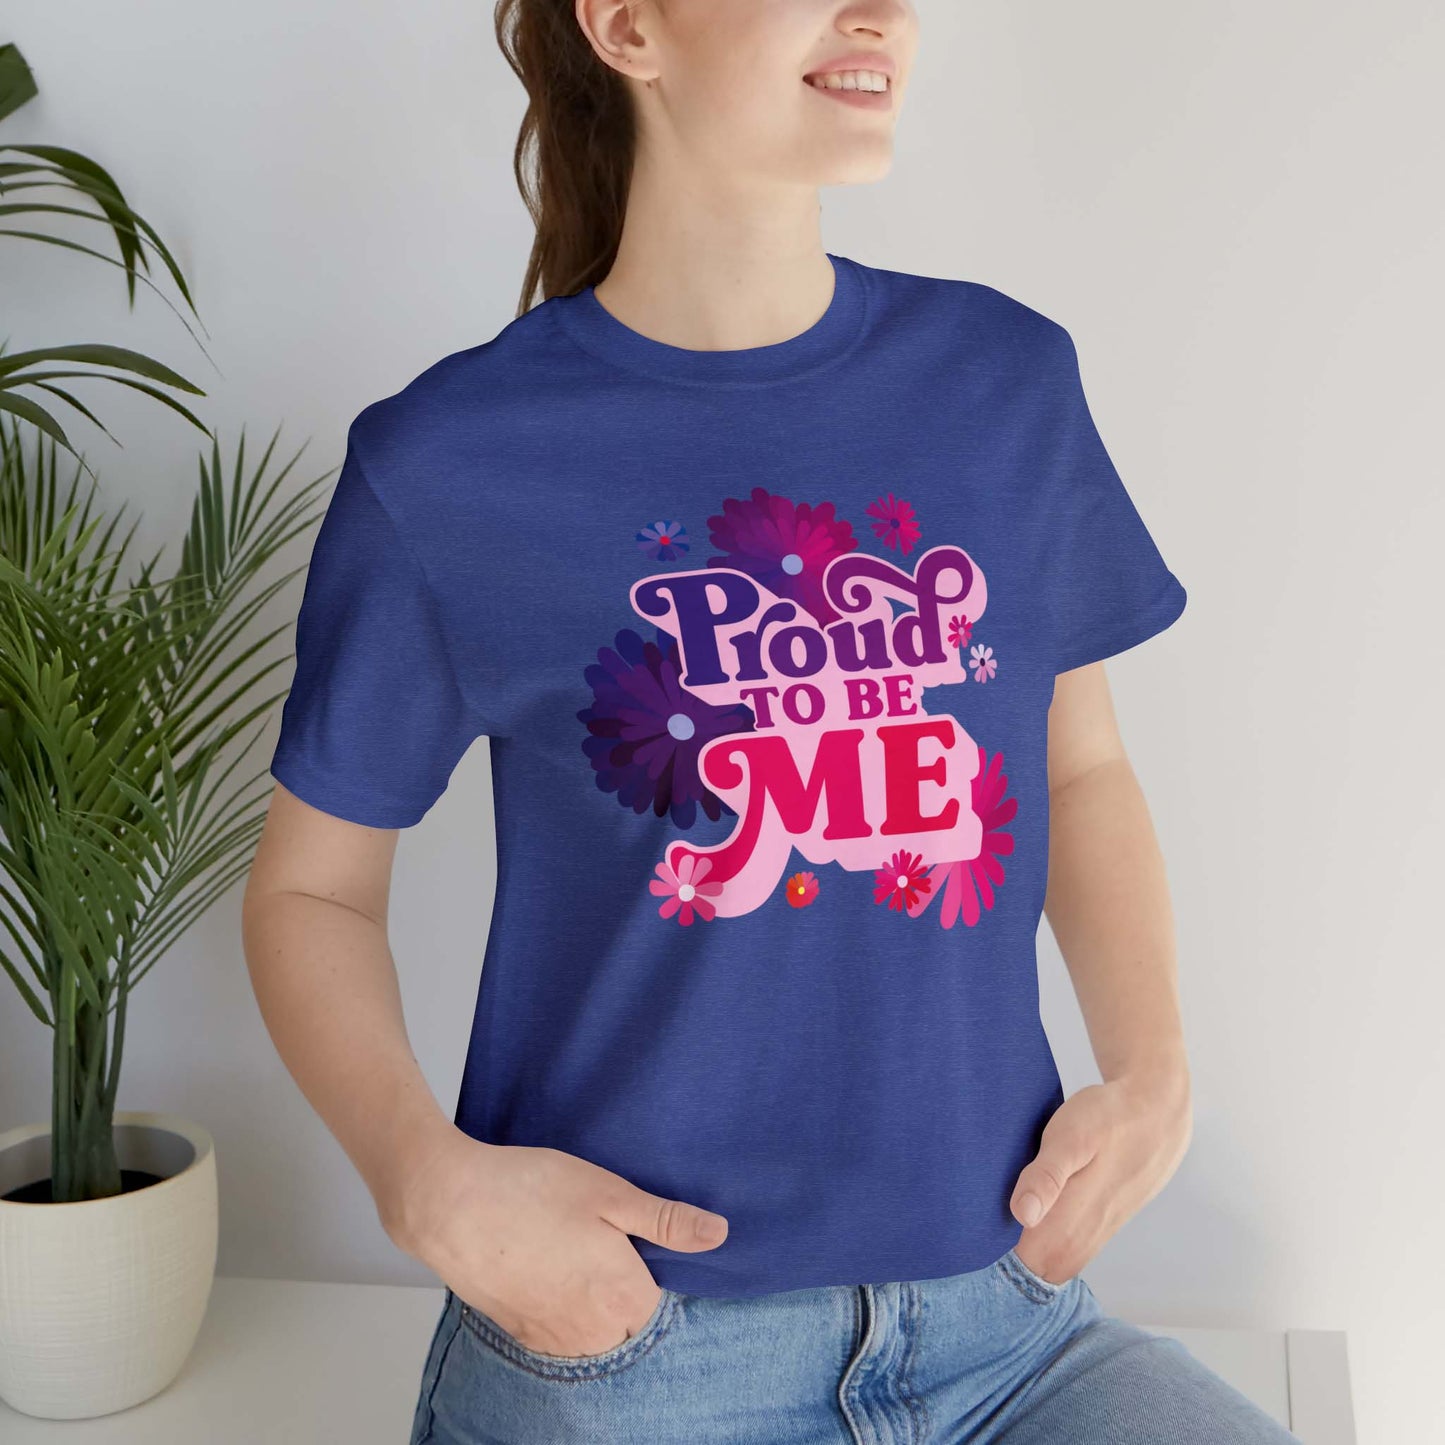 This women’s T-shirt is designed for those who are proud to be themselves! Are you proud of the woman you are today? This purple/blue t-shirt with PROUD TO BE ME quote is the perfect addition to your wardrobe.